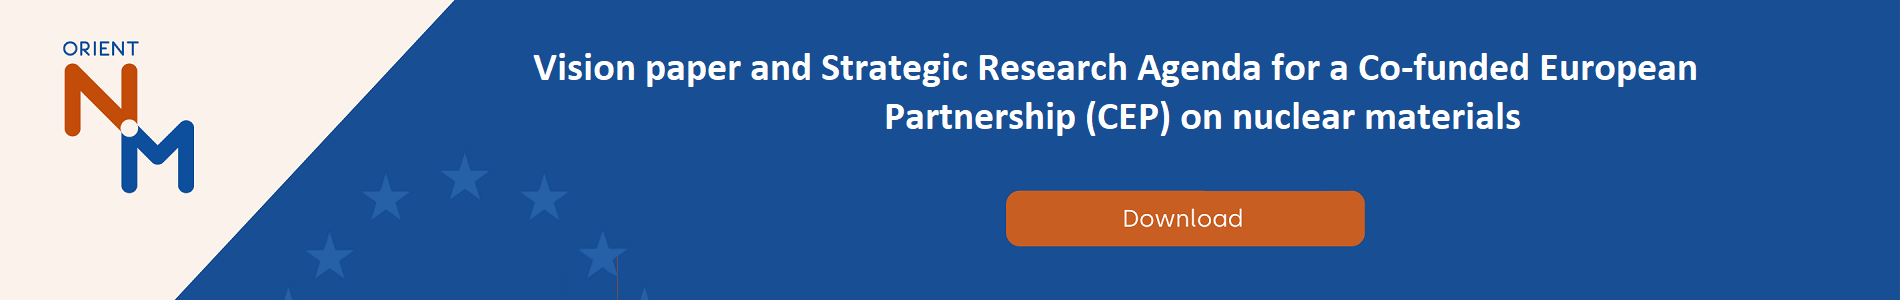 banner of ORIENT-NM Vision Paper and Strategic Research Agenda